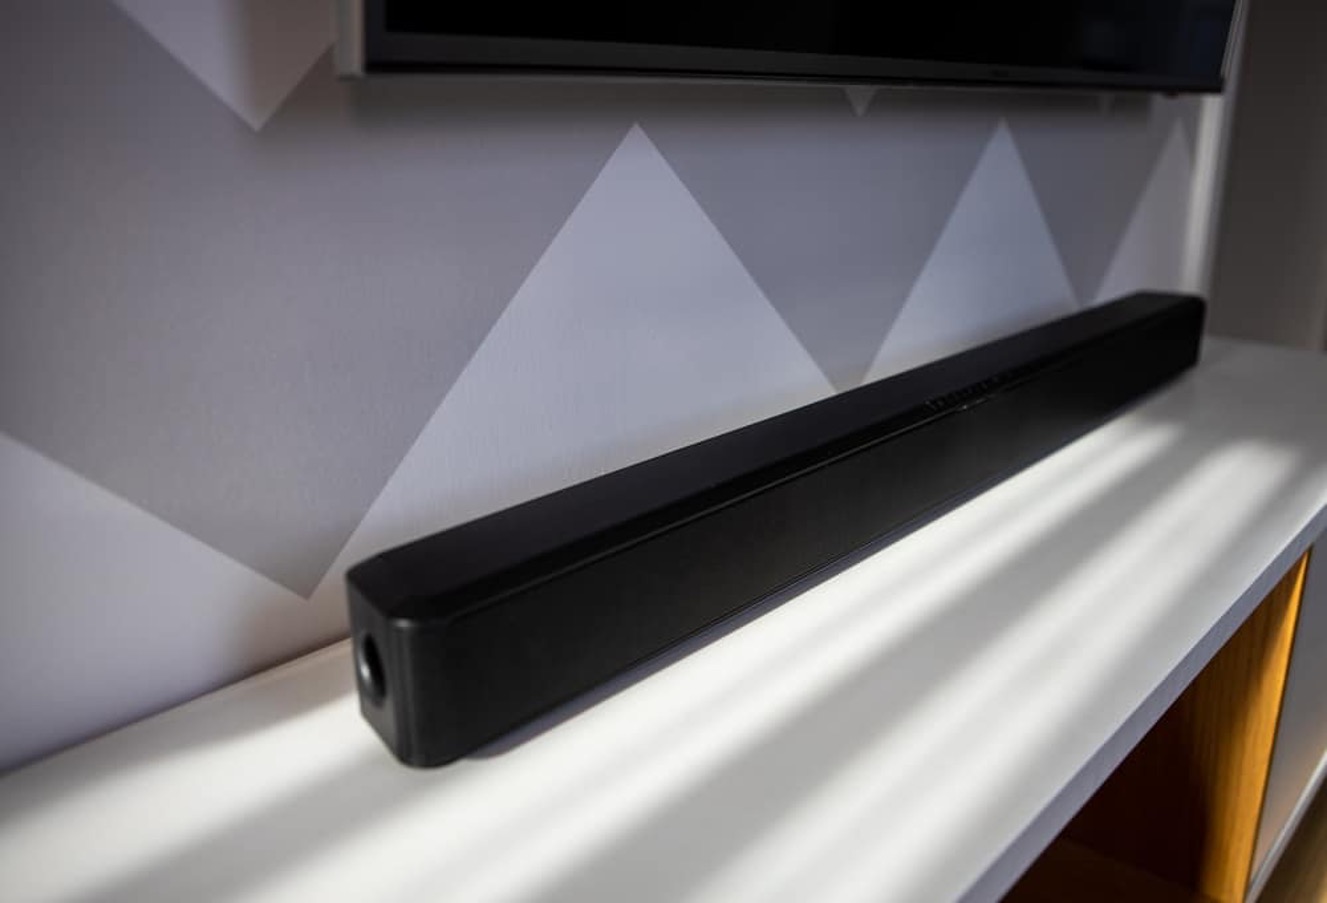 how-to-turn-on-lg-soundbar-sk1-without-a-remote